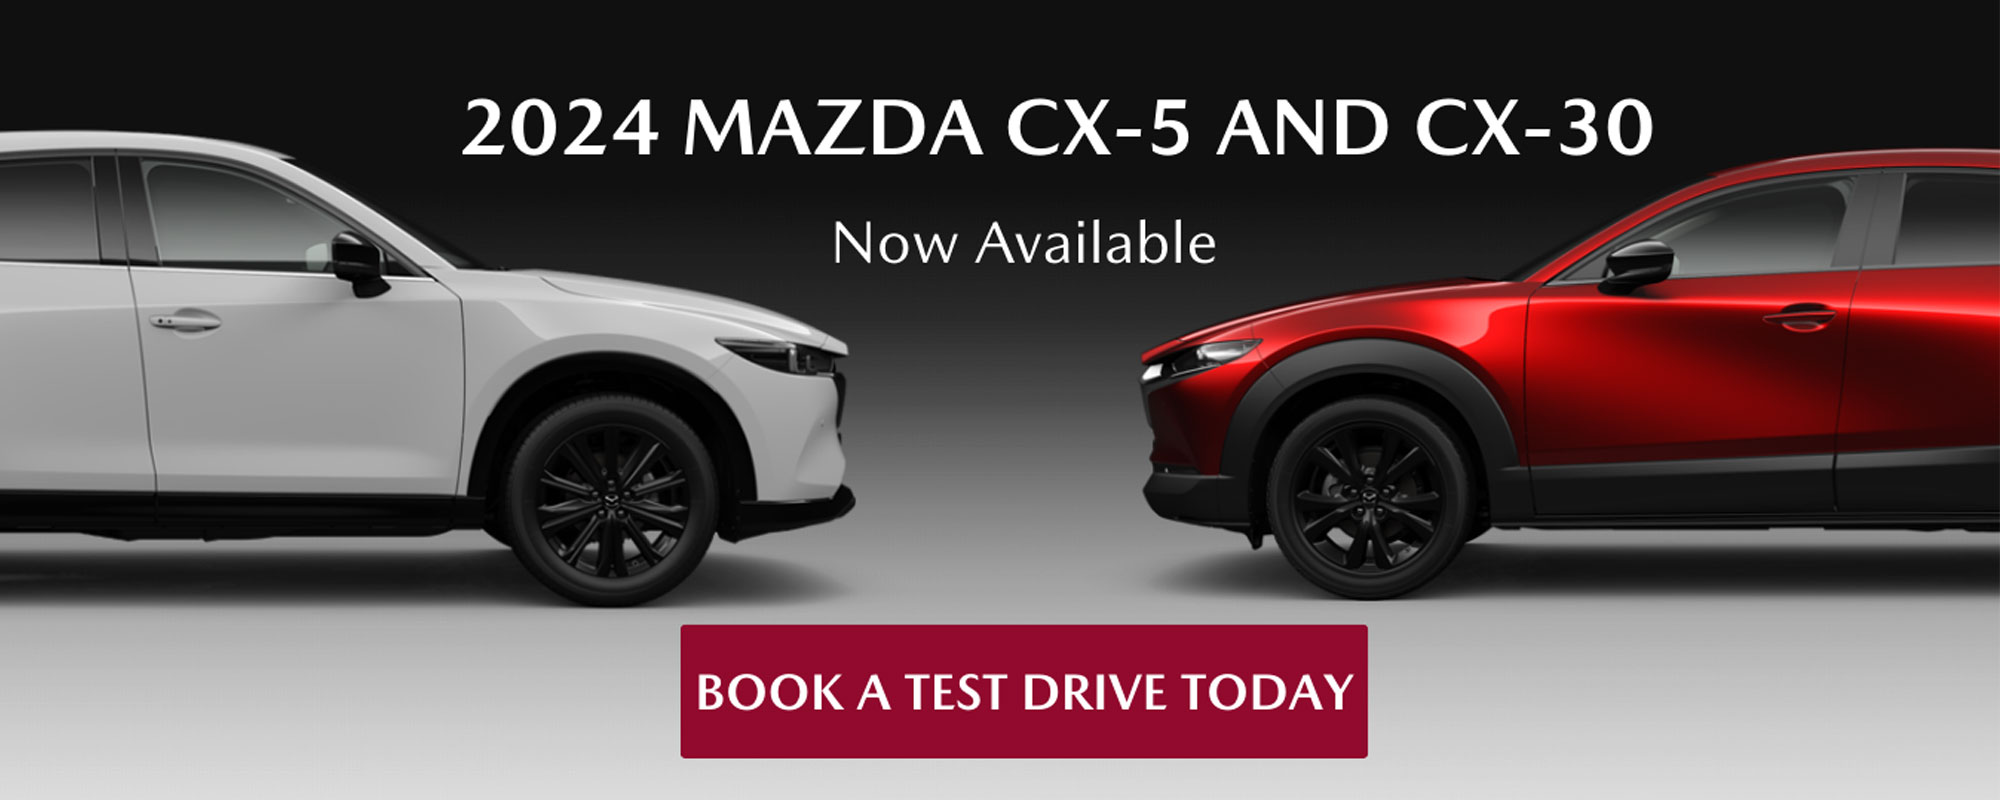 Book A Test Drive Today